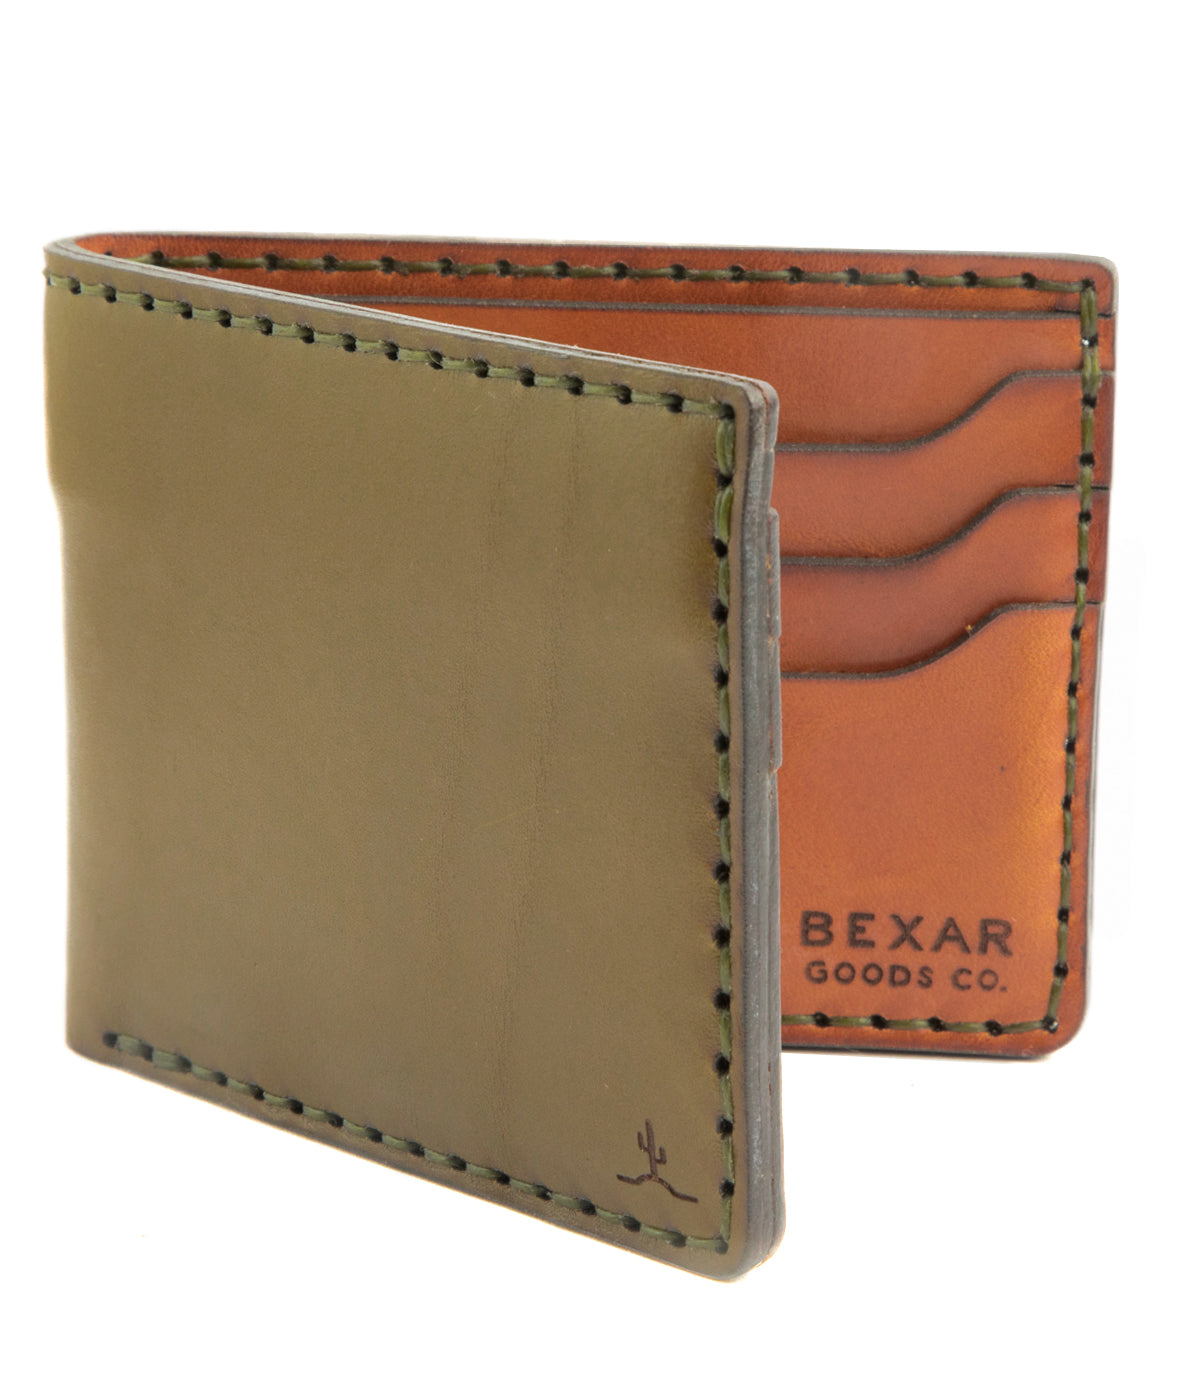 green exterior and brown interior leather six pocket bifold wallet